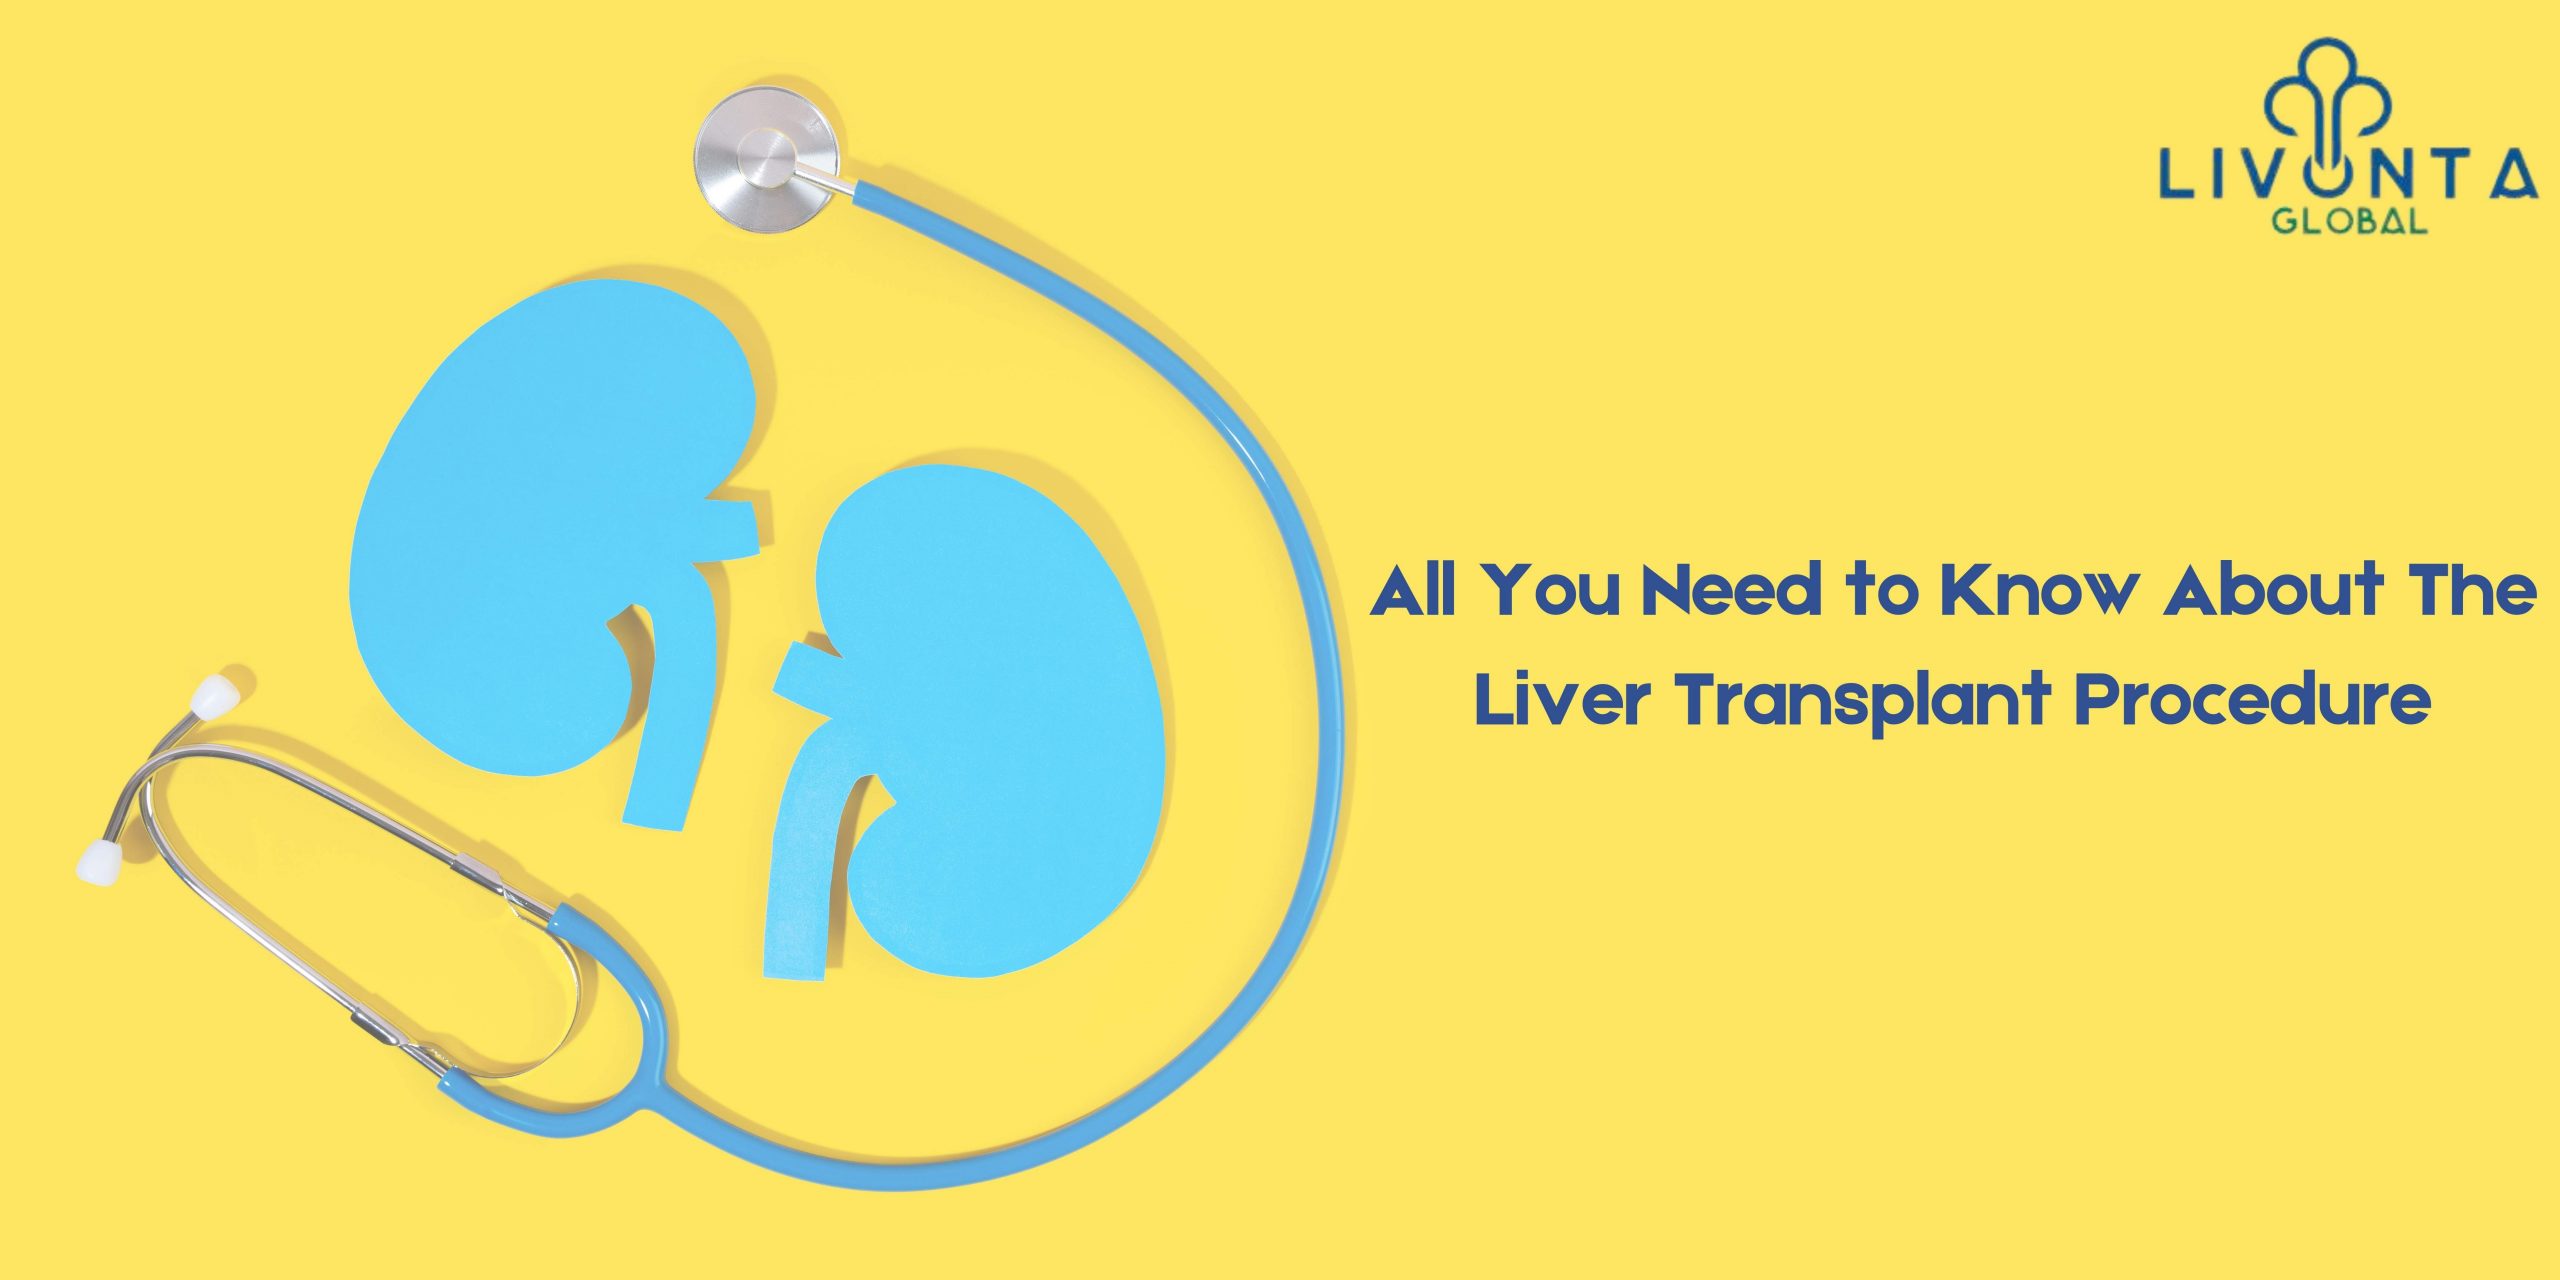 All You Need to Know About The Liver Transplant Procedure